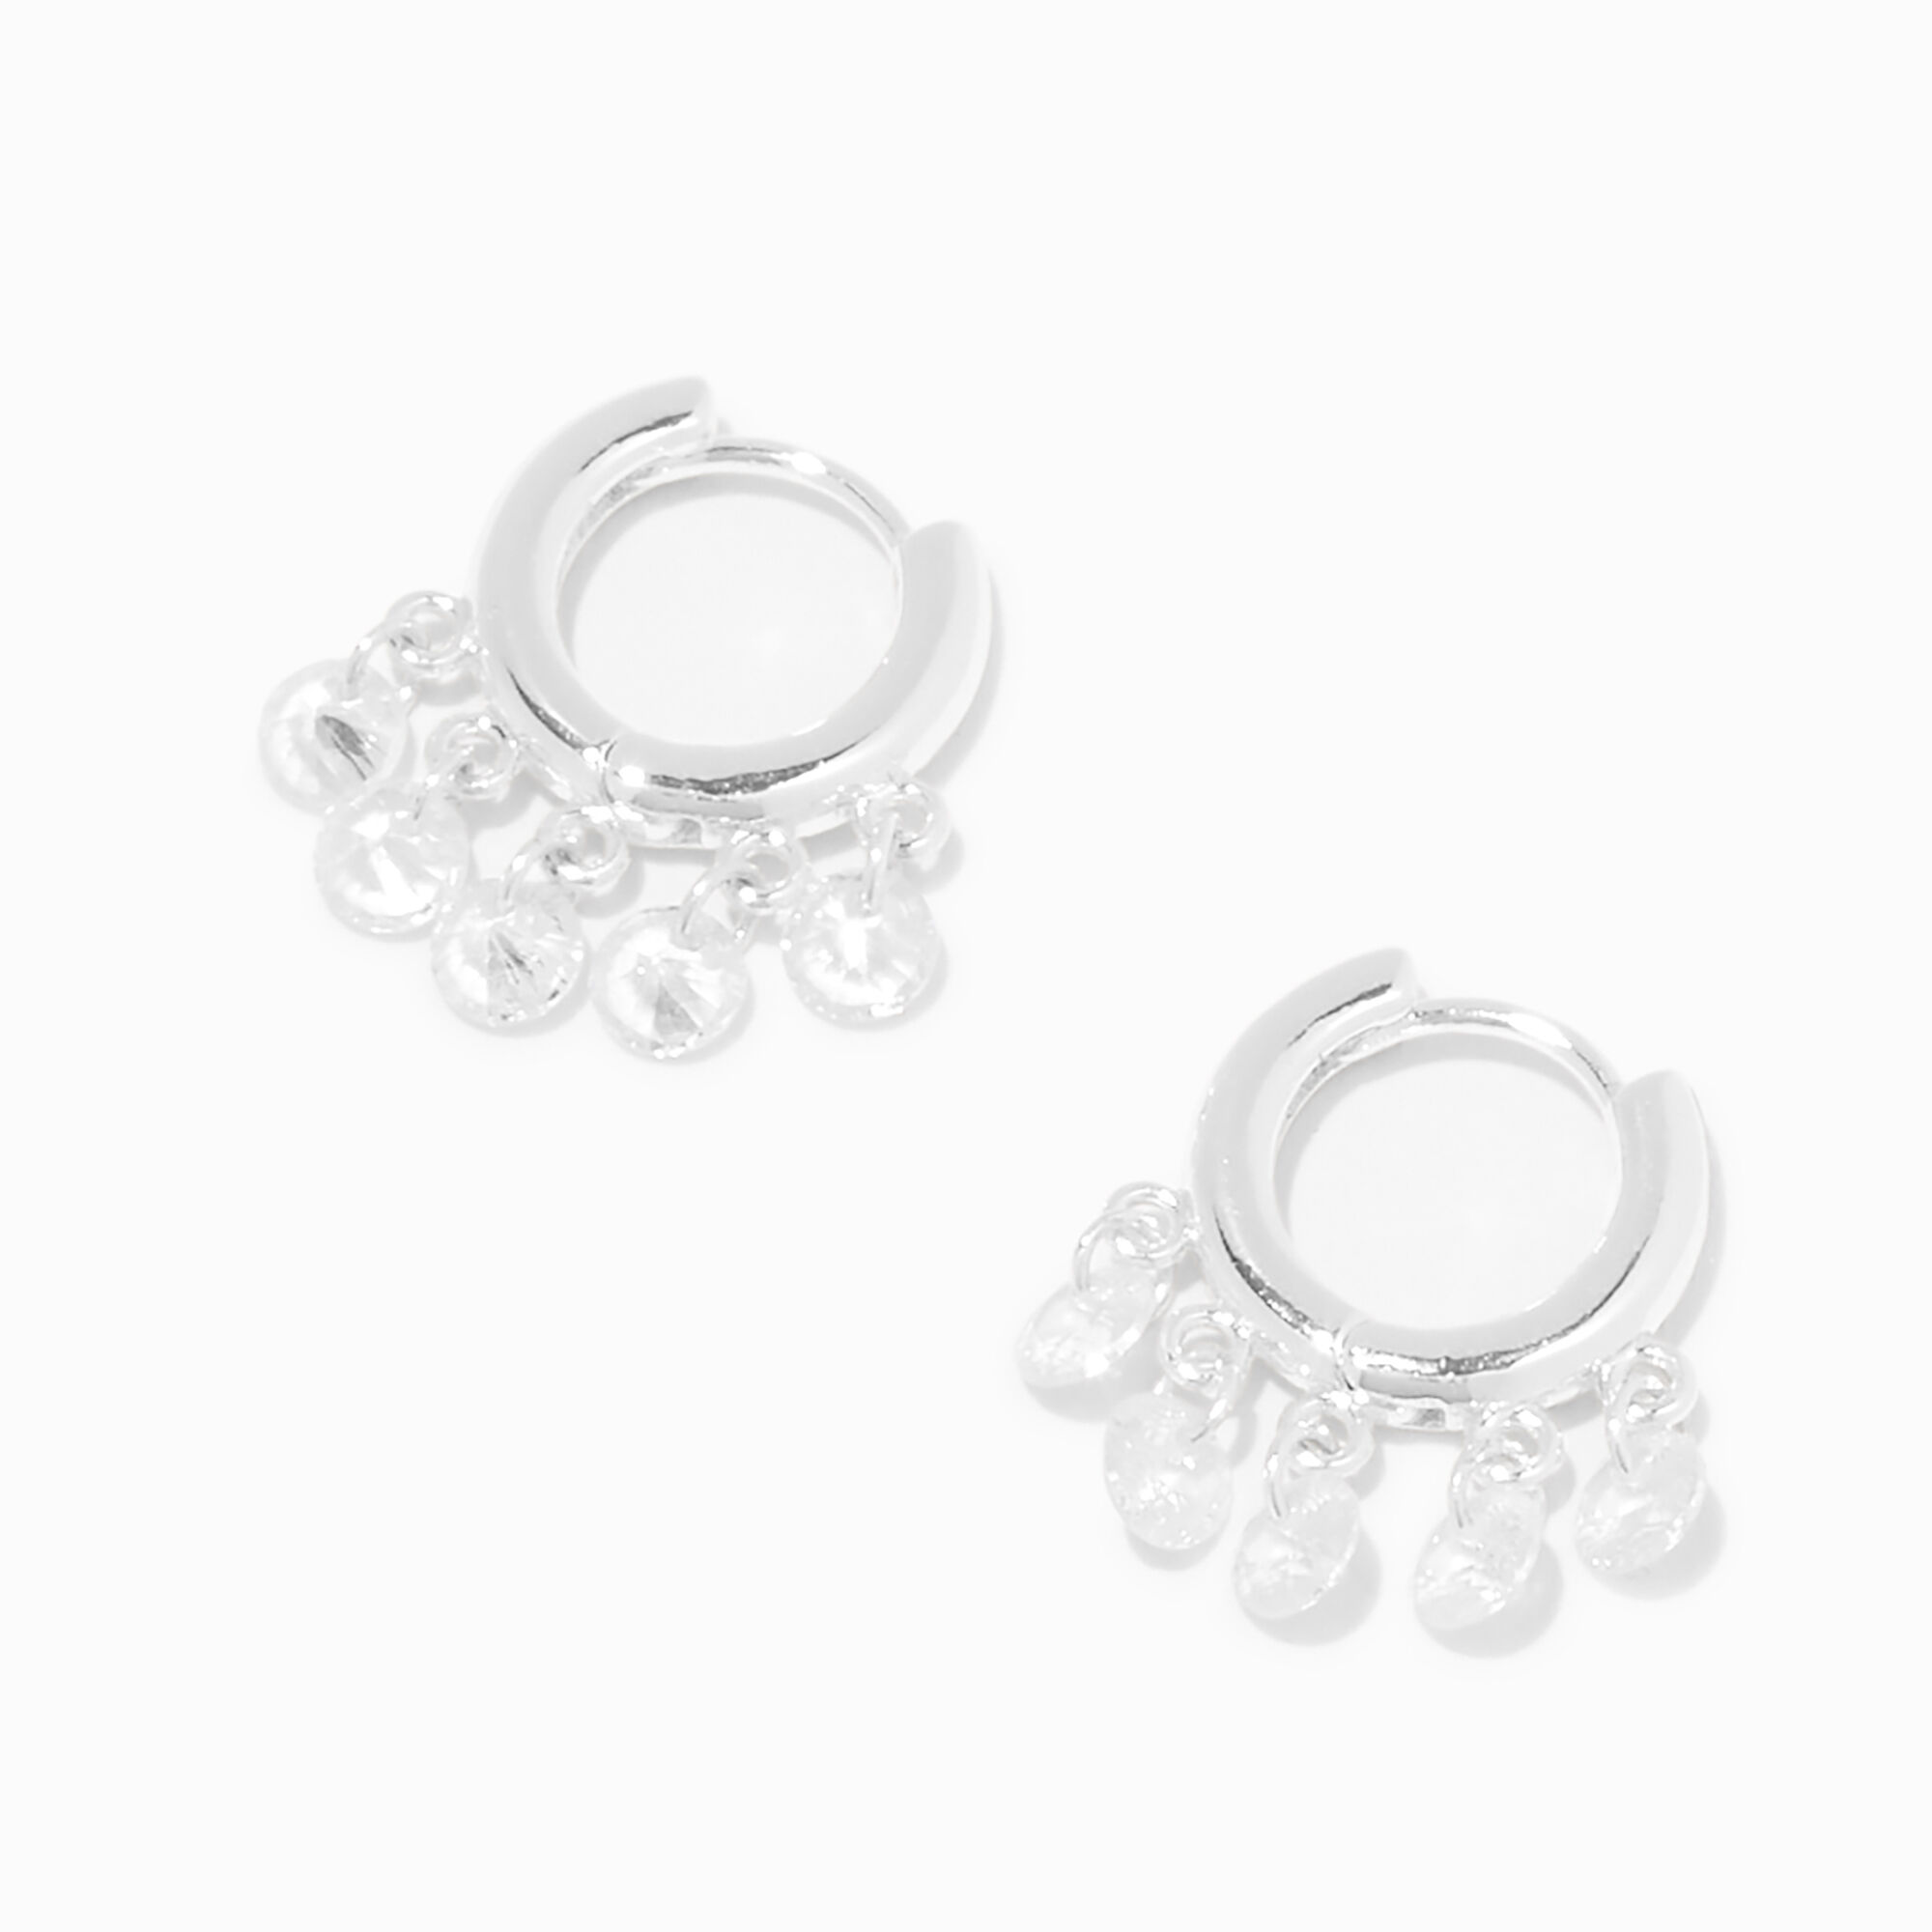 View Claires Crystal Confetti Charms 10MM Tone Hoop Earrings Silver information